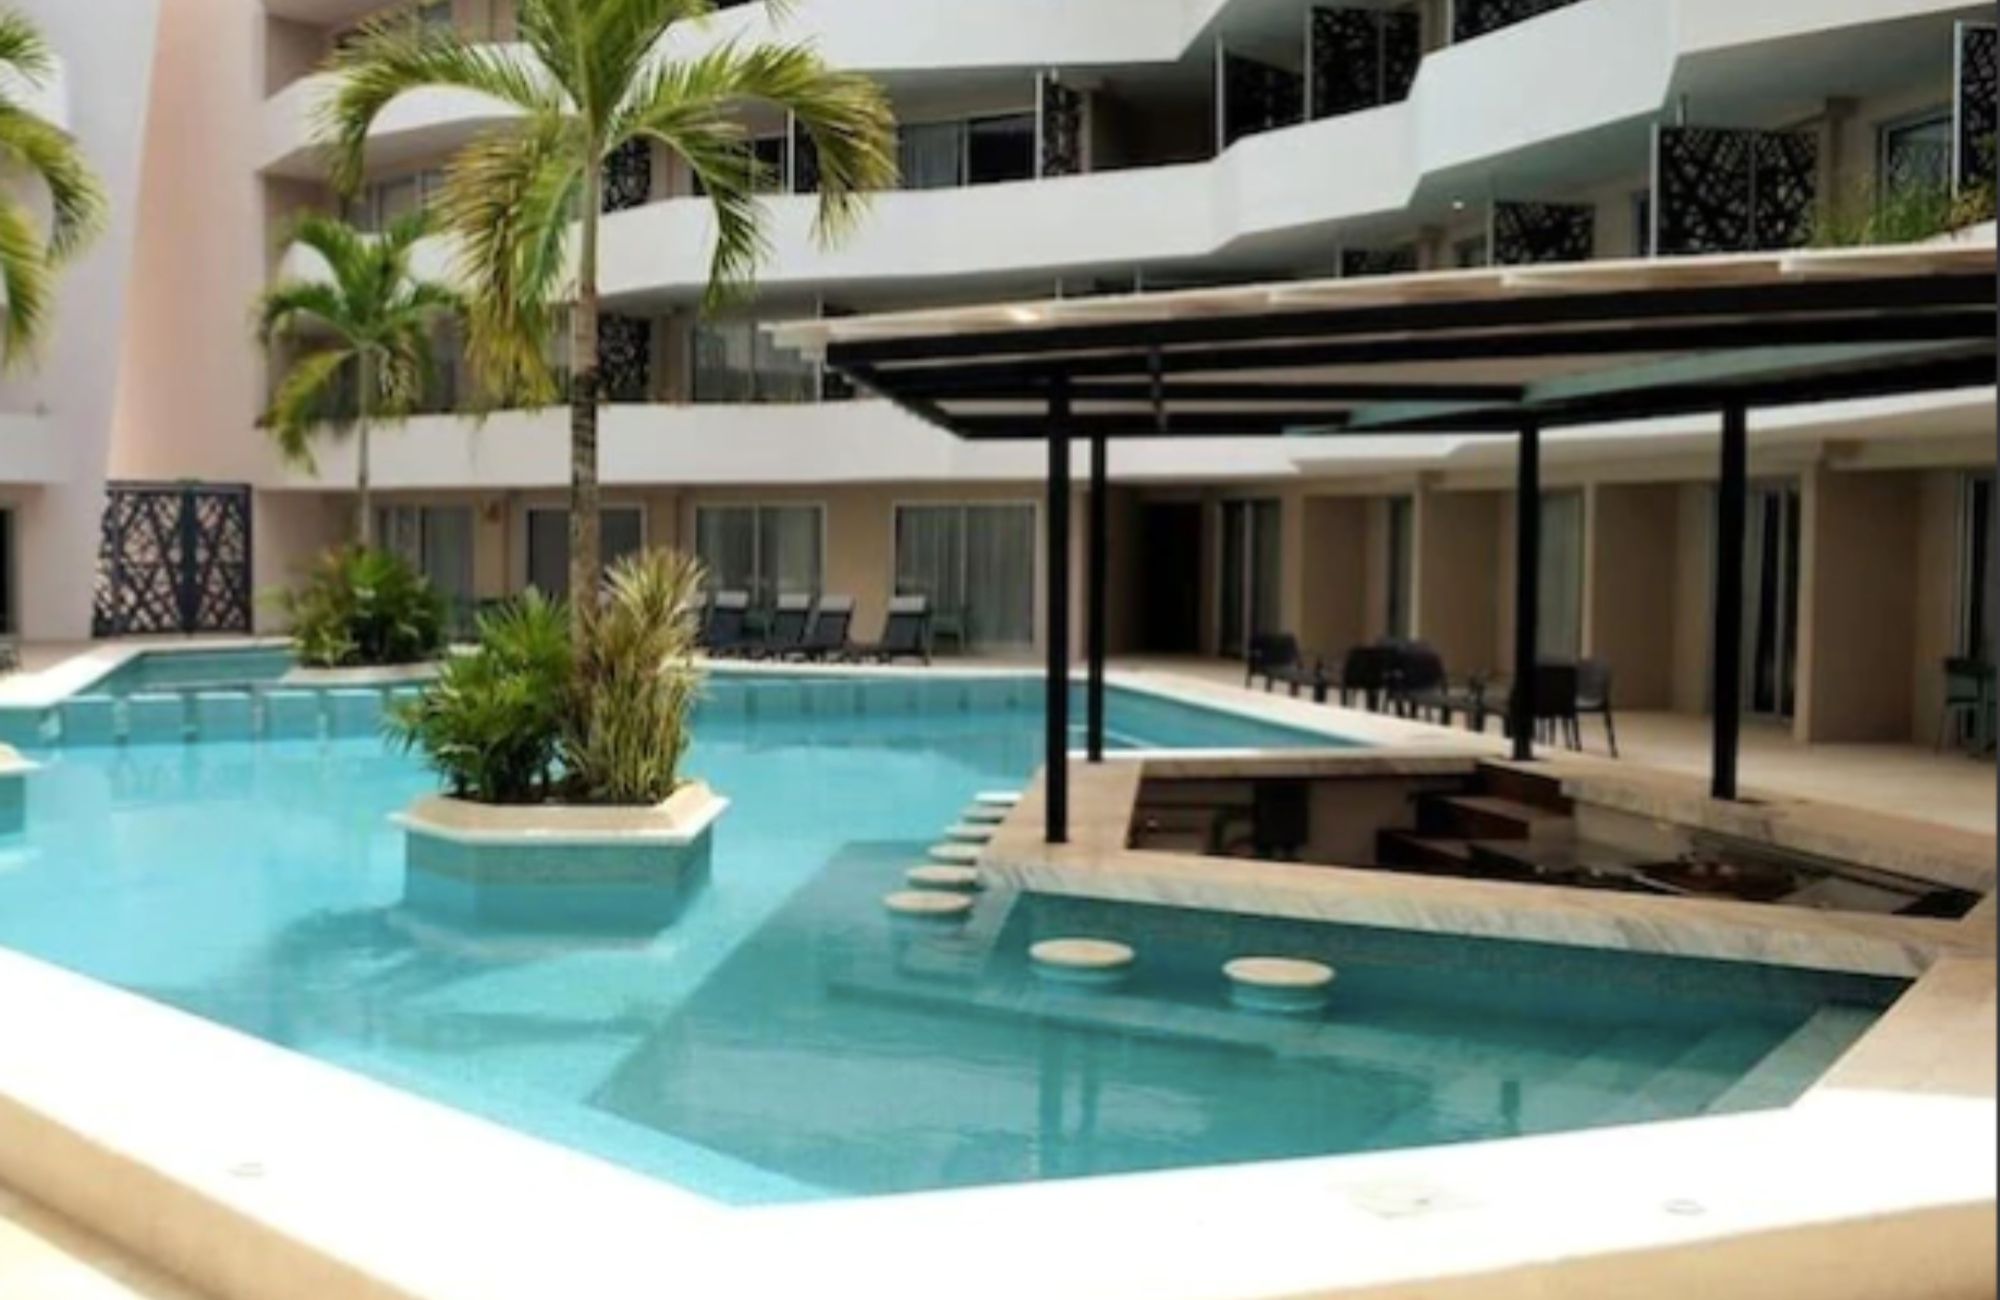 Condo with special discount, more than 15 amenities in pre-construction for sale Playa del Carmen